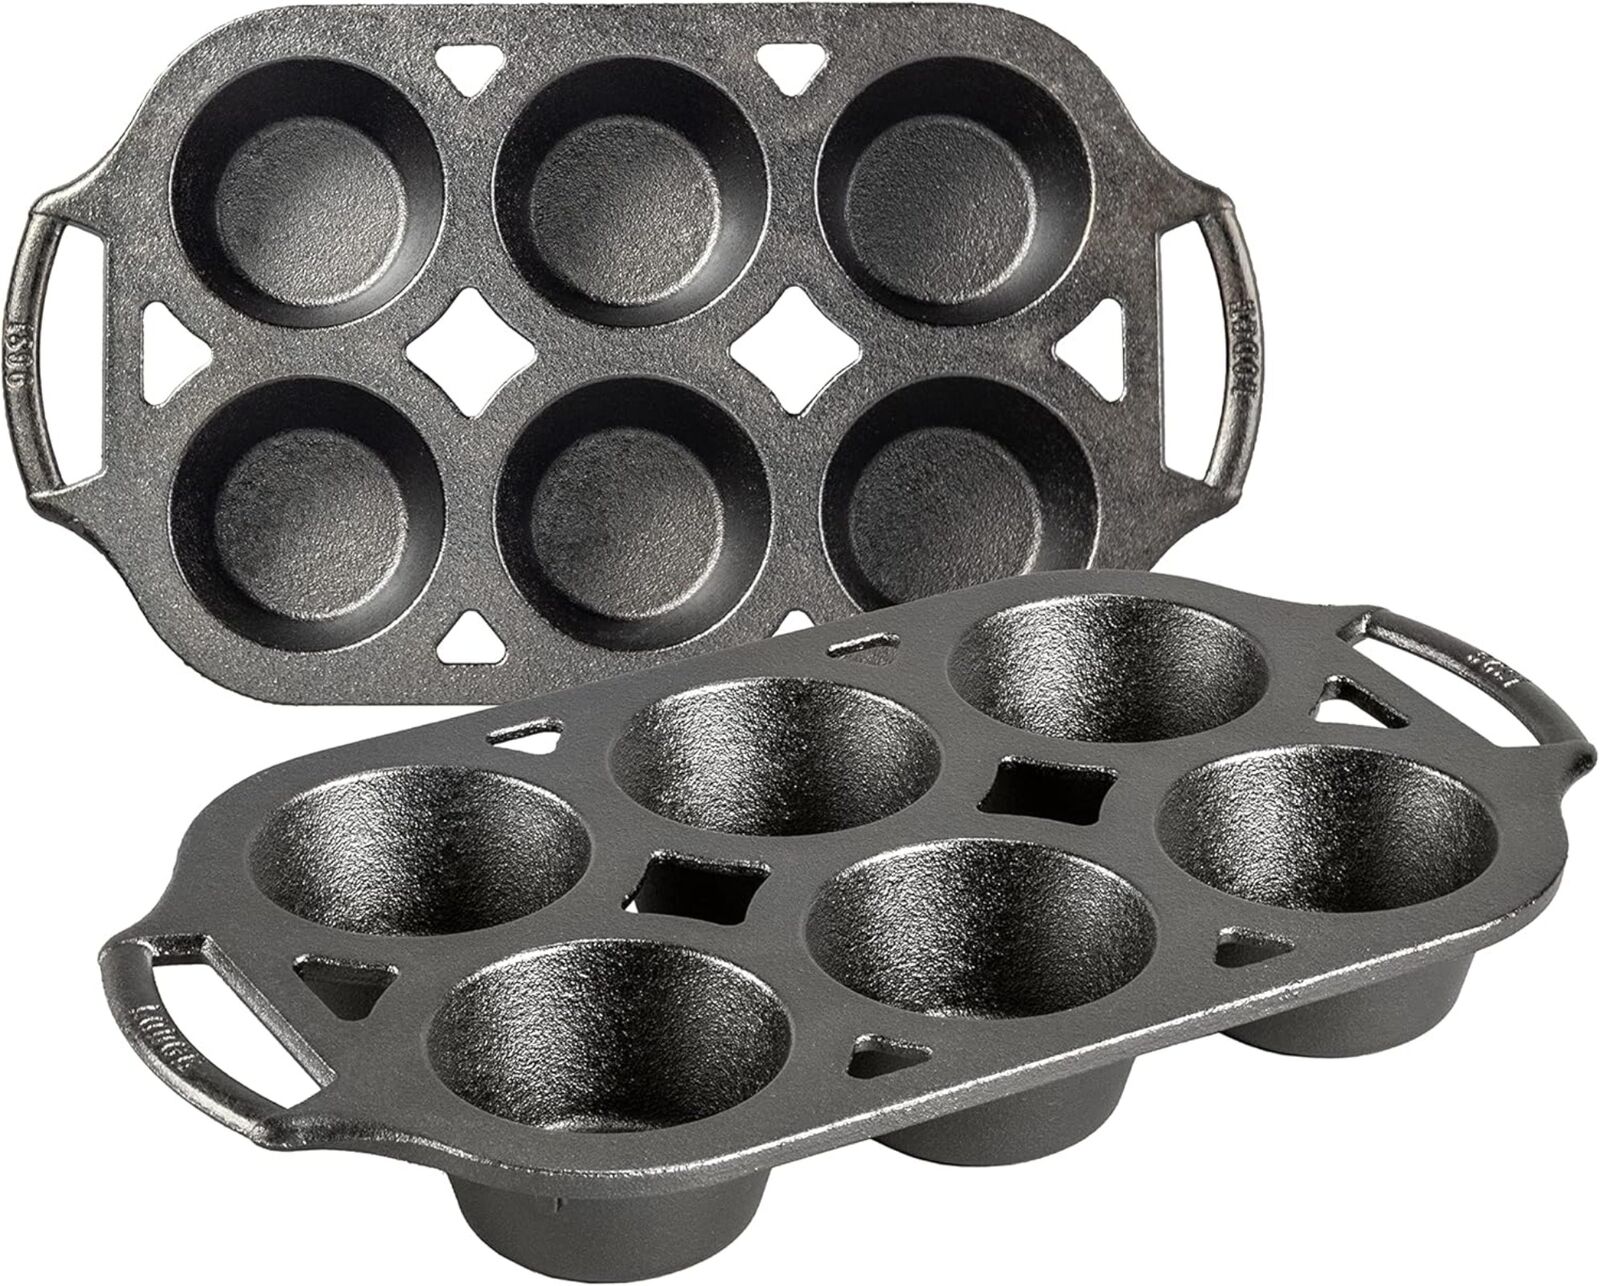 Cast Iron 2 Piece Muffin Pan Set, Edge-to-edge Even Heat, Very Durable